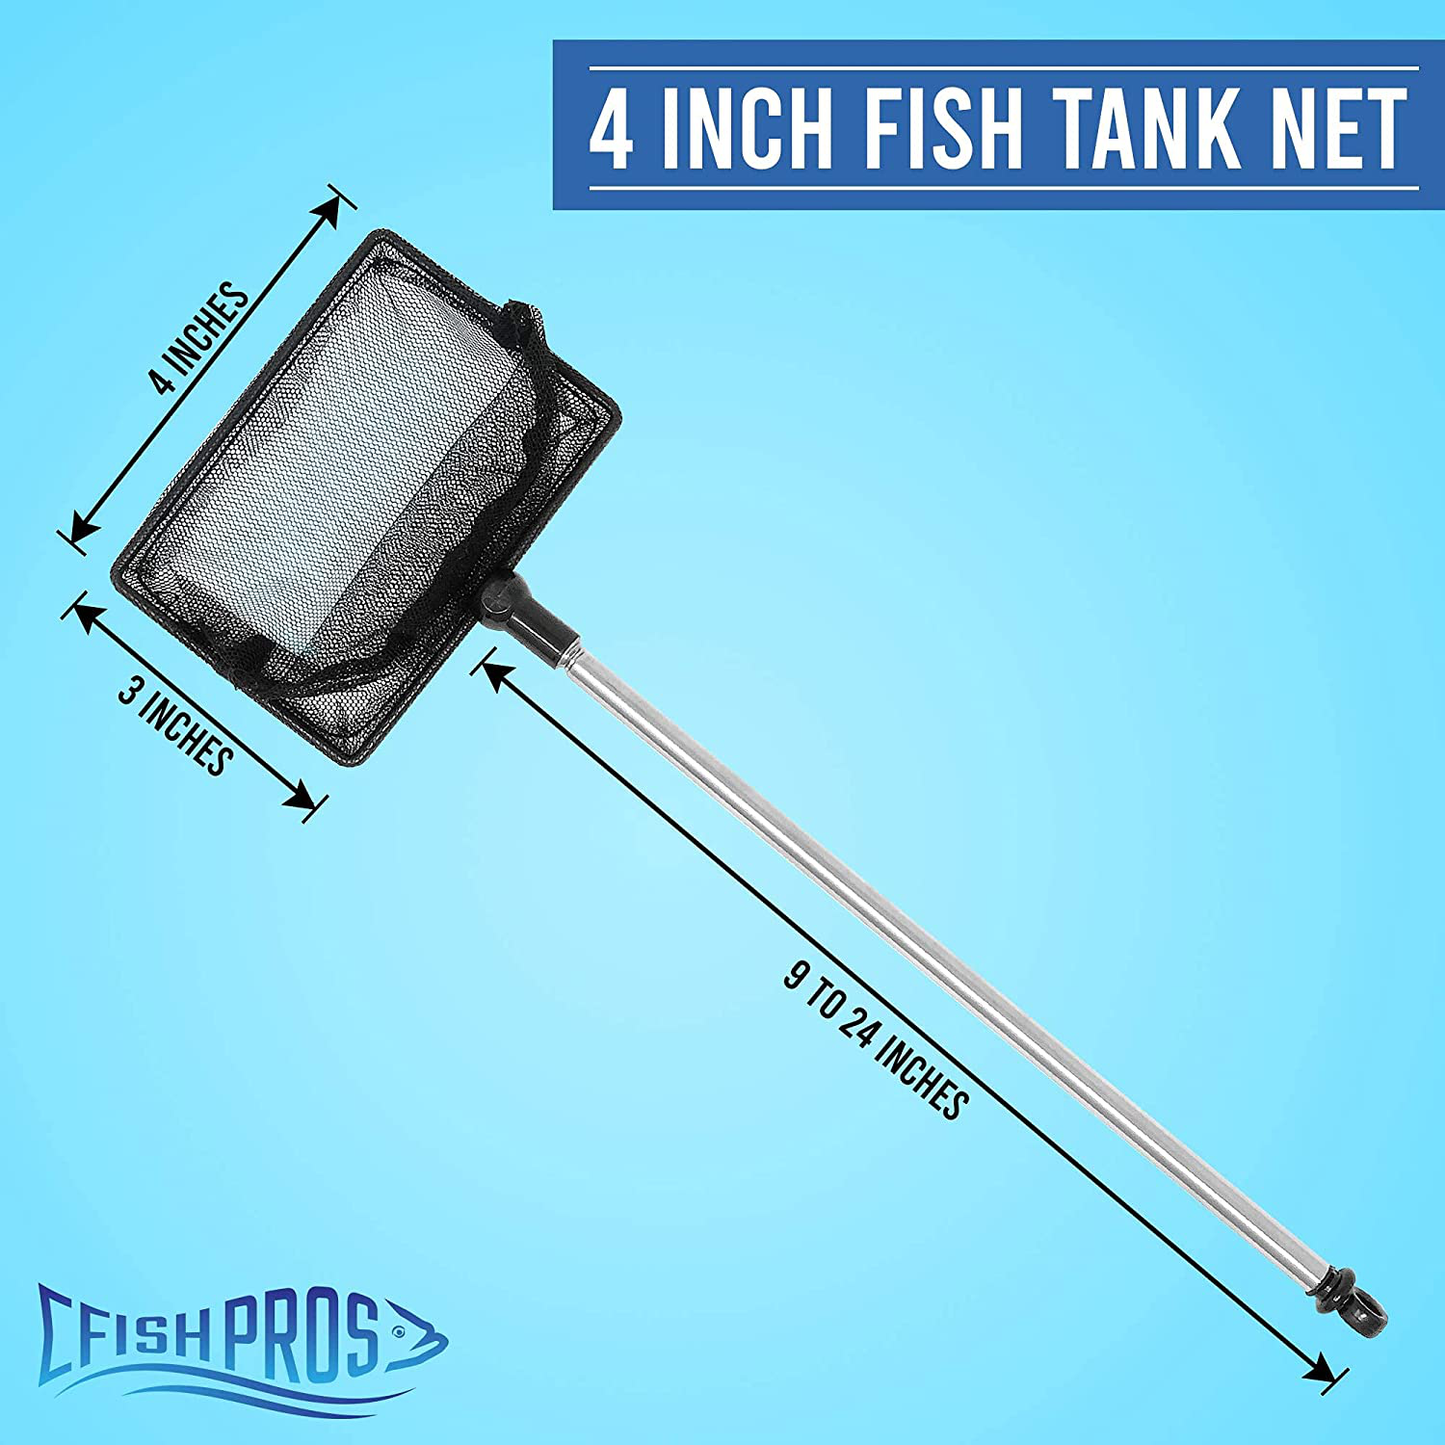 FISH PROS Fish Net for Fish Tank - 2.5 Inch Deep Mesh Scooper with Extendable Handle up to 24 Inches Long – Large Scoop, Telescopic Pond Skimmer Nets for Cleaning Tanks - Aquarium Accessories Animals & Pet Supplies > Pet Supplies > Fish Supplies > Aquarium Fish Nets FISH PROS   